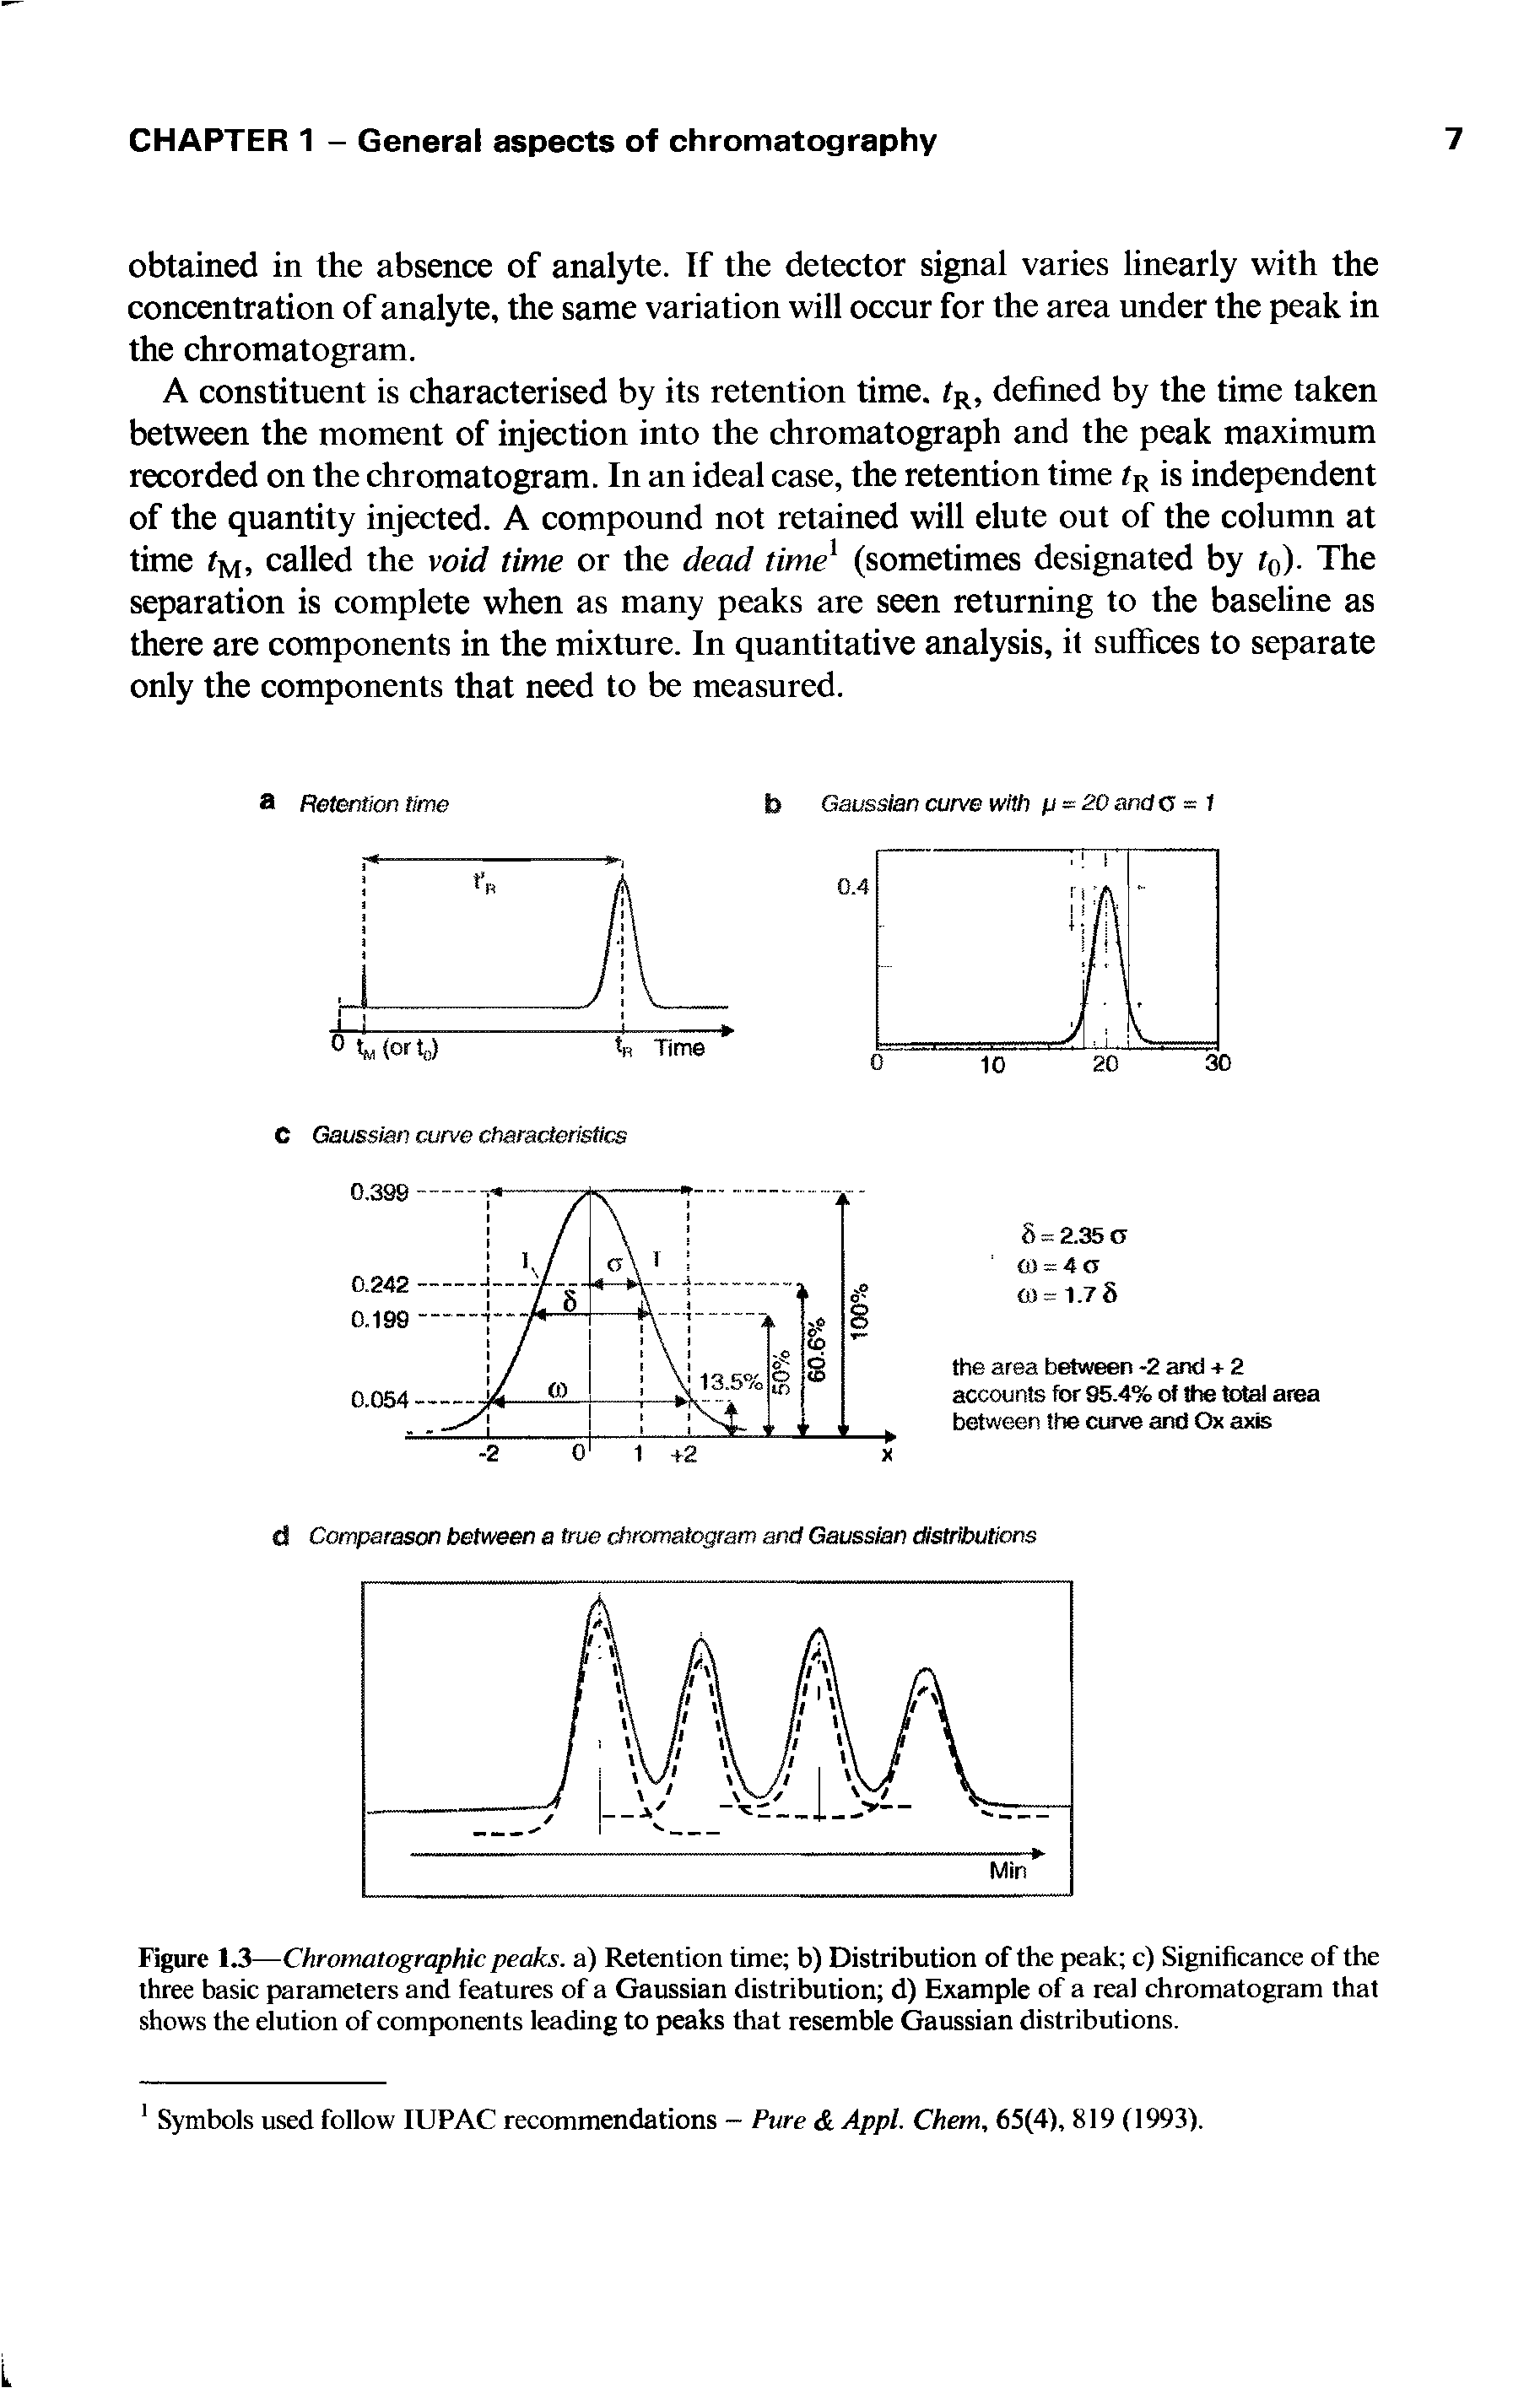 Figure 1.3—Chromatographic peaks, a) Retention time b) Distribution of the peak c) Significance of the three basic parameters and features of a Gaussian distribution d) Example of a real chromatogram that shows the elution of components leading to peaks that resemble Gaussian distributions.